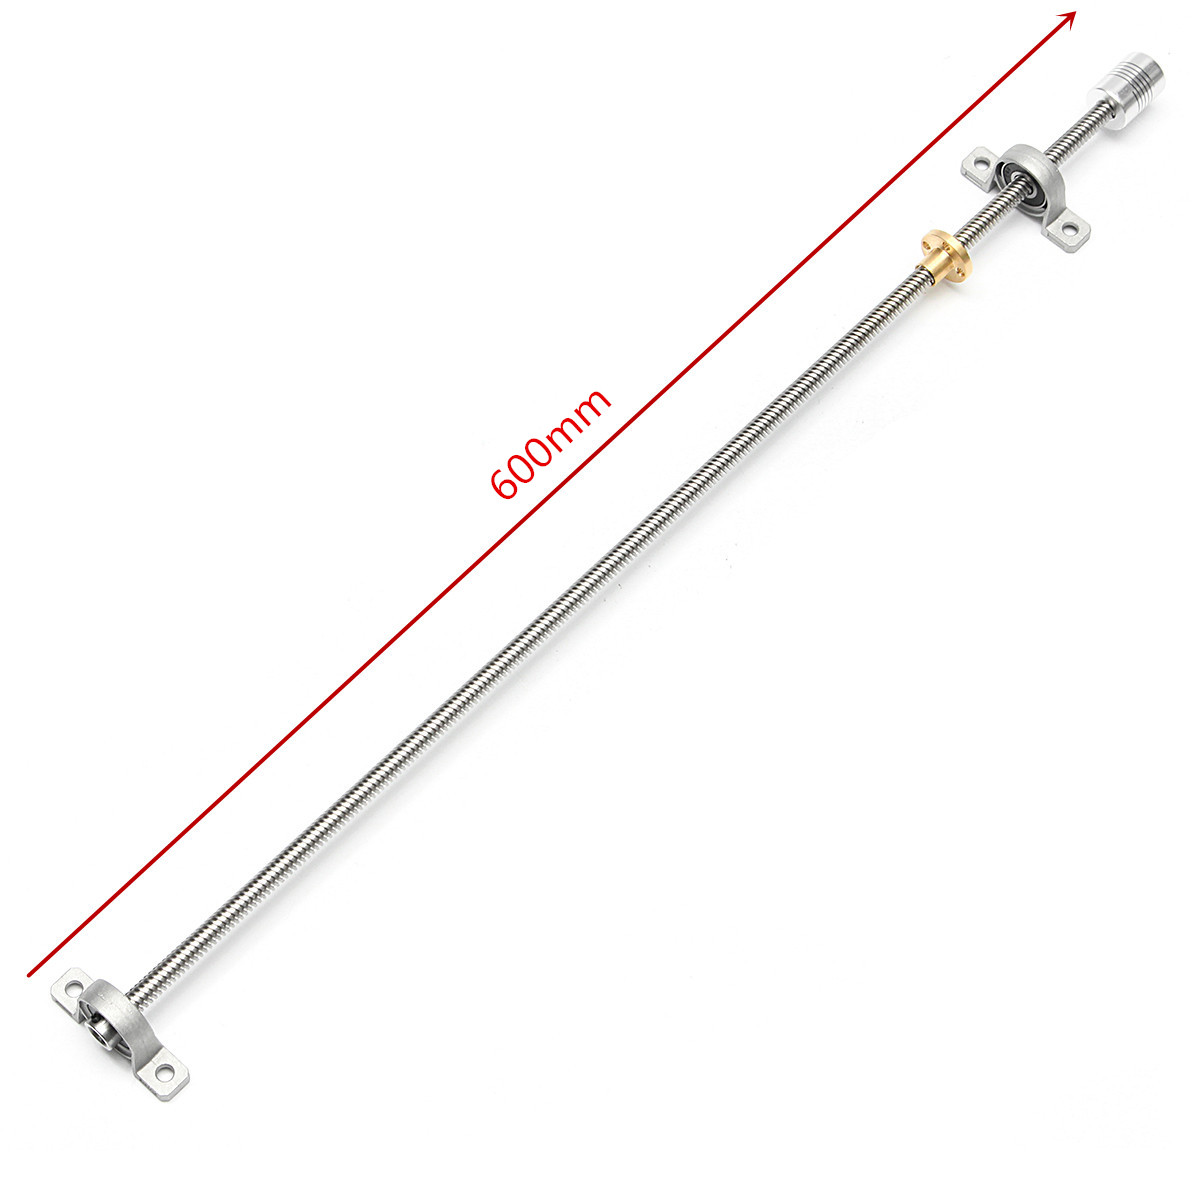 T8 600mm Stainless Steel Lead Screw Coupling Shaft Mounting + Motor For 3D Printer 29